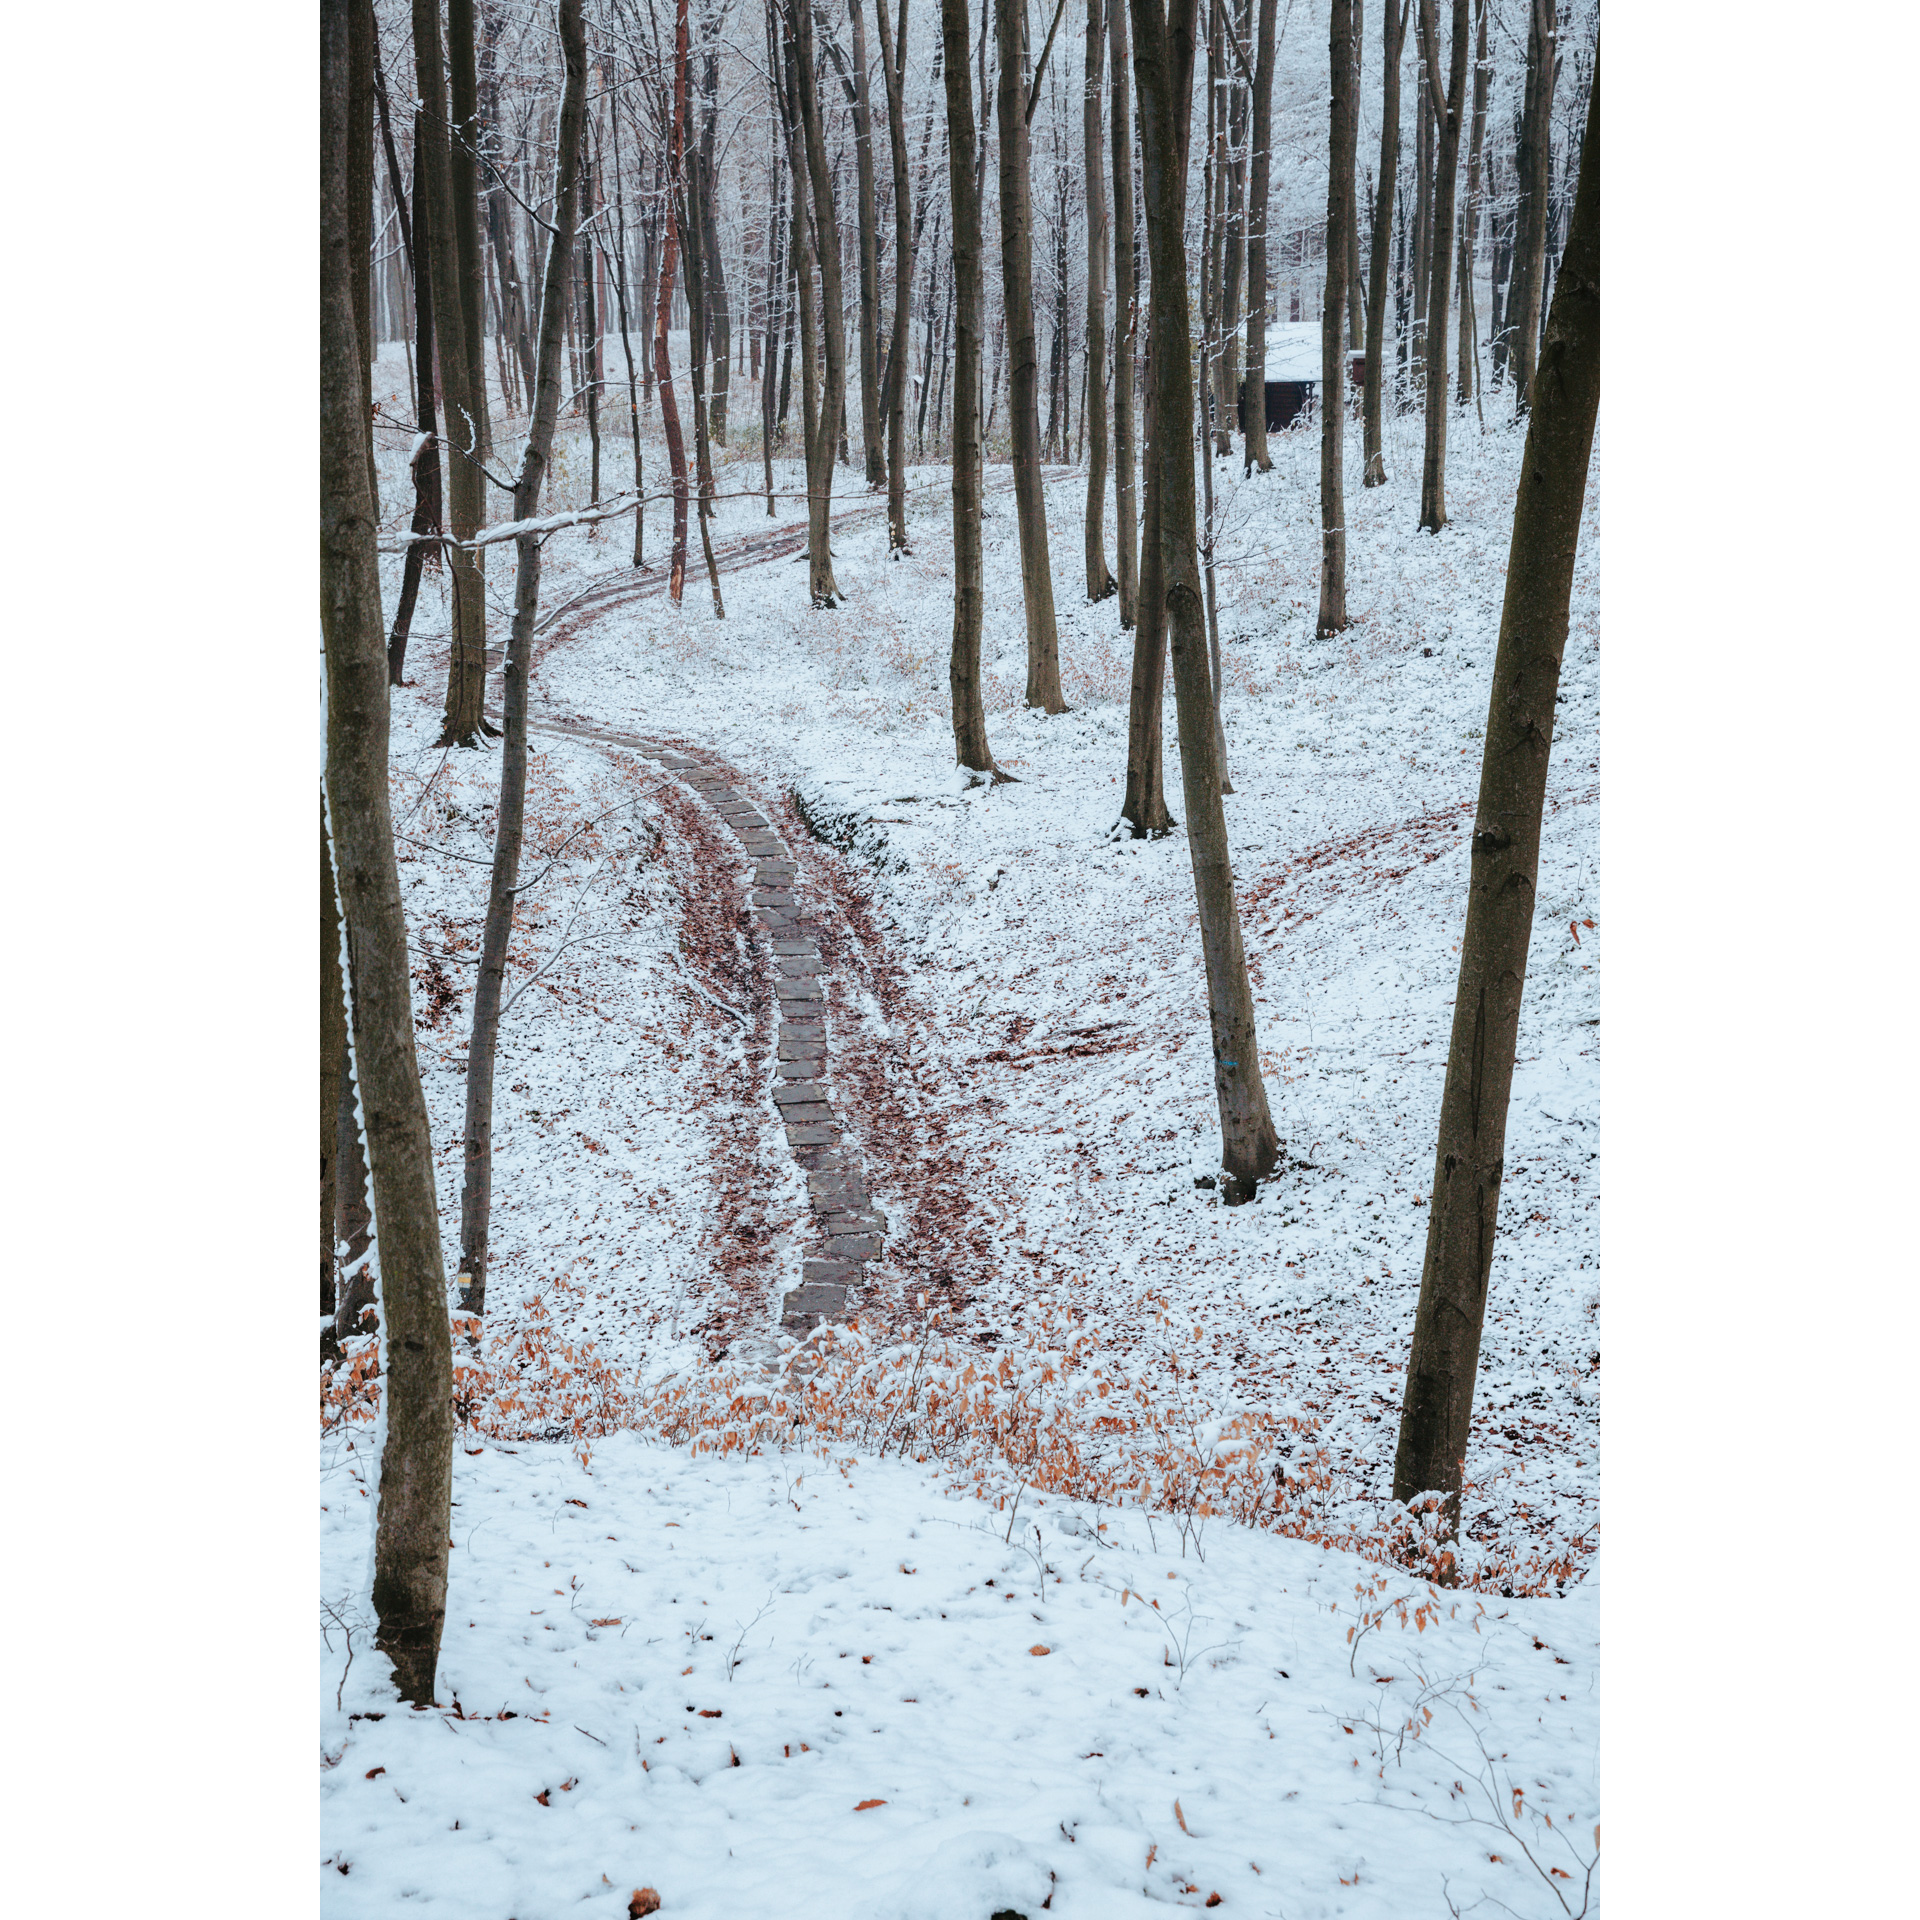 Top view of a snowy forest path made of cement slabs among tall tree trunks